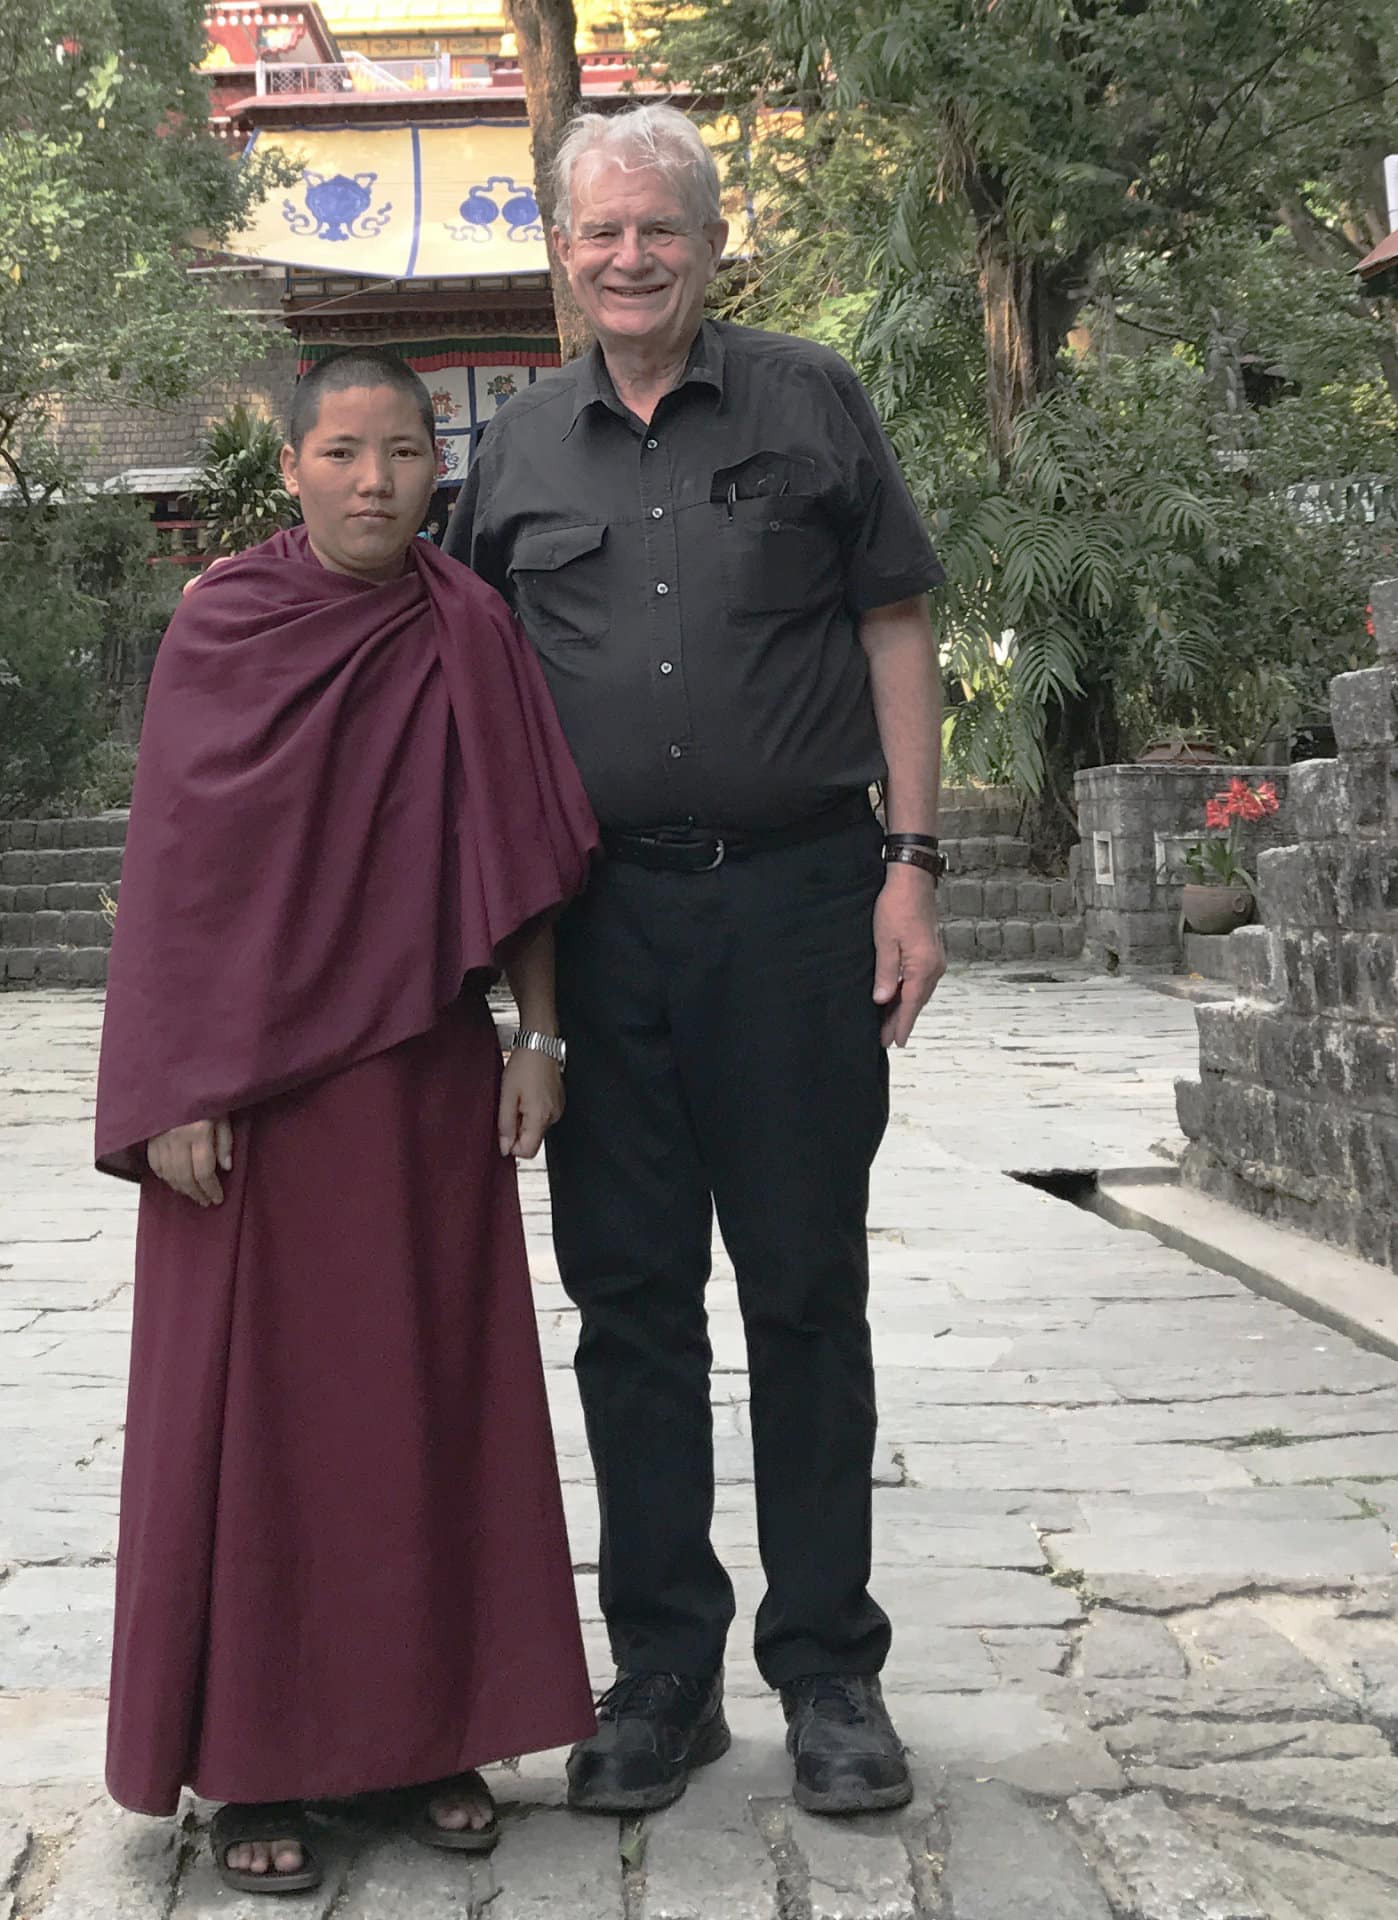 Bill Crews with a monk on a visit to Dharamshala, Tibet.